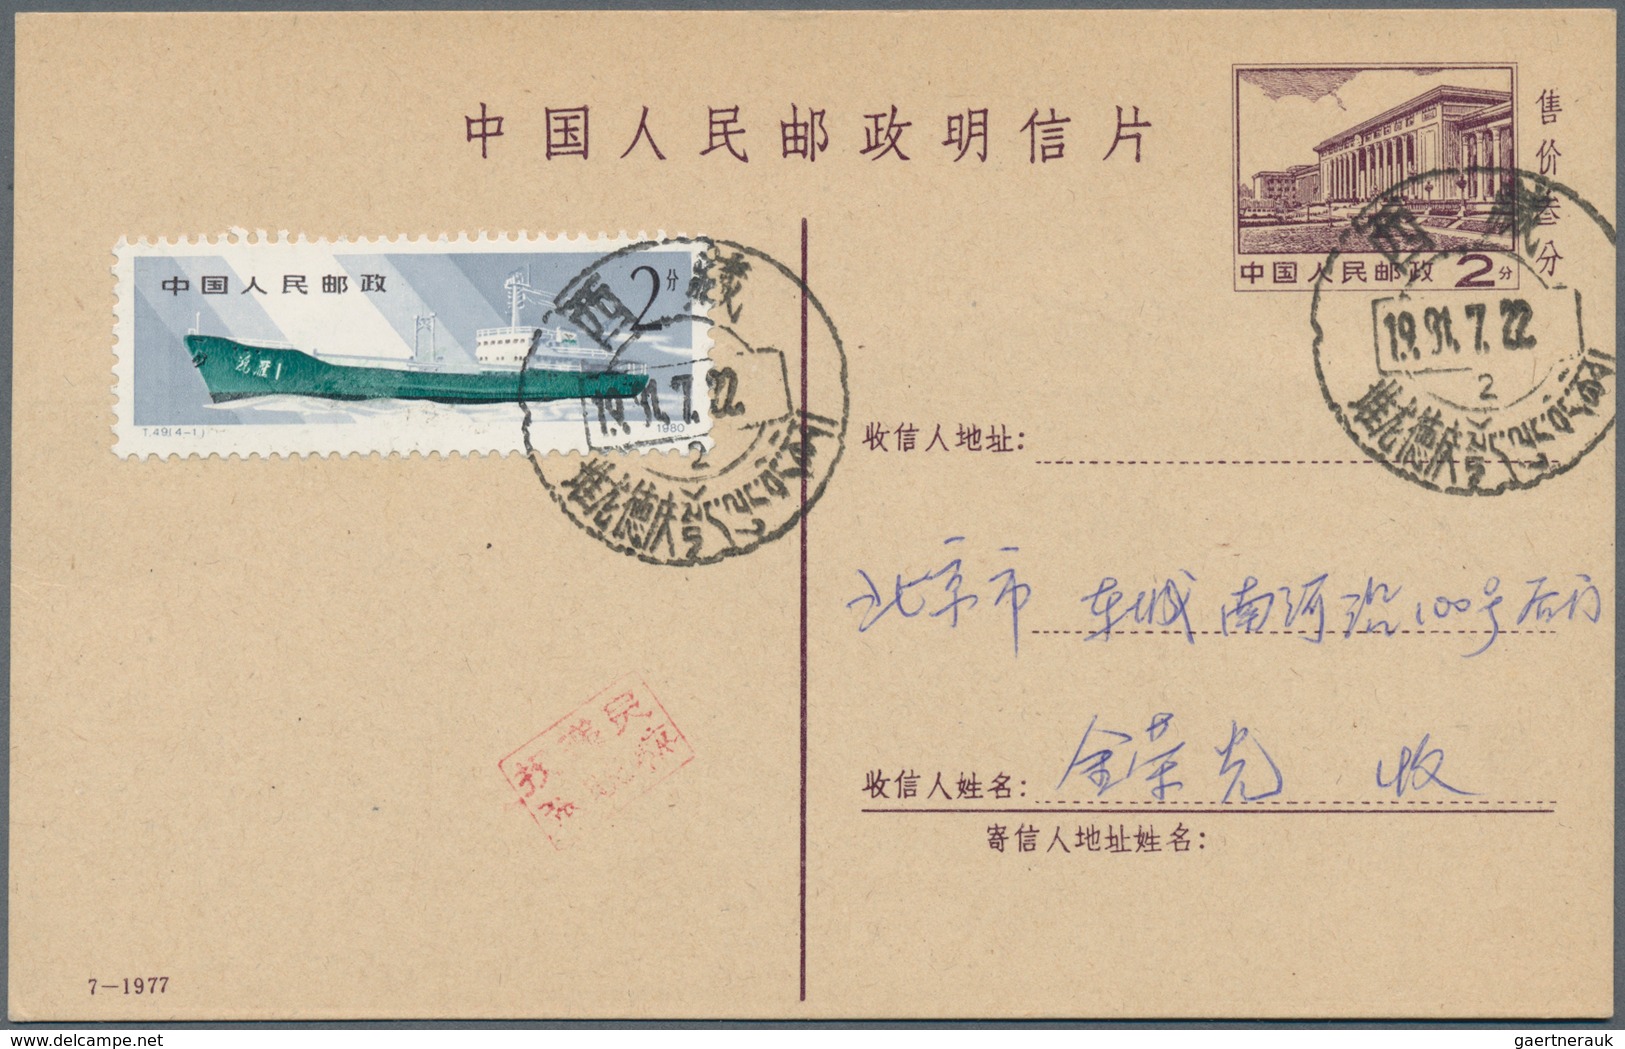 China - Volksrepublik - Ganzsachen: 1977/81, Used In Tibet, Card 2 F. Uprated To Peking: 7-1977 By 1 - Postales